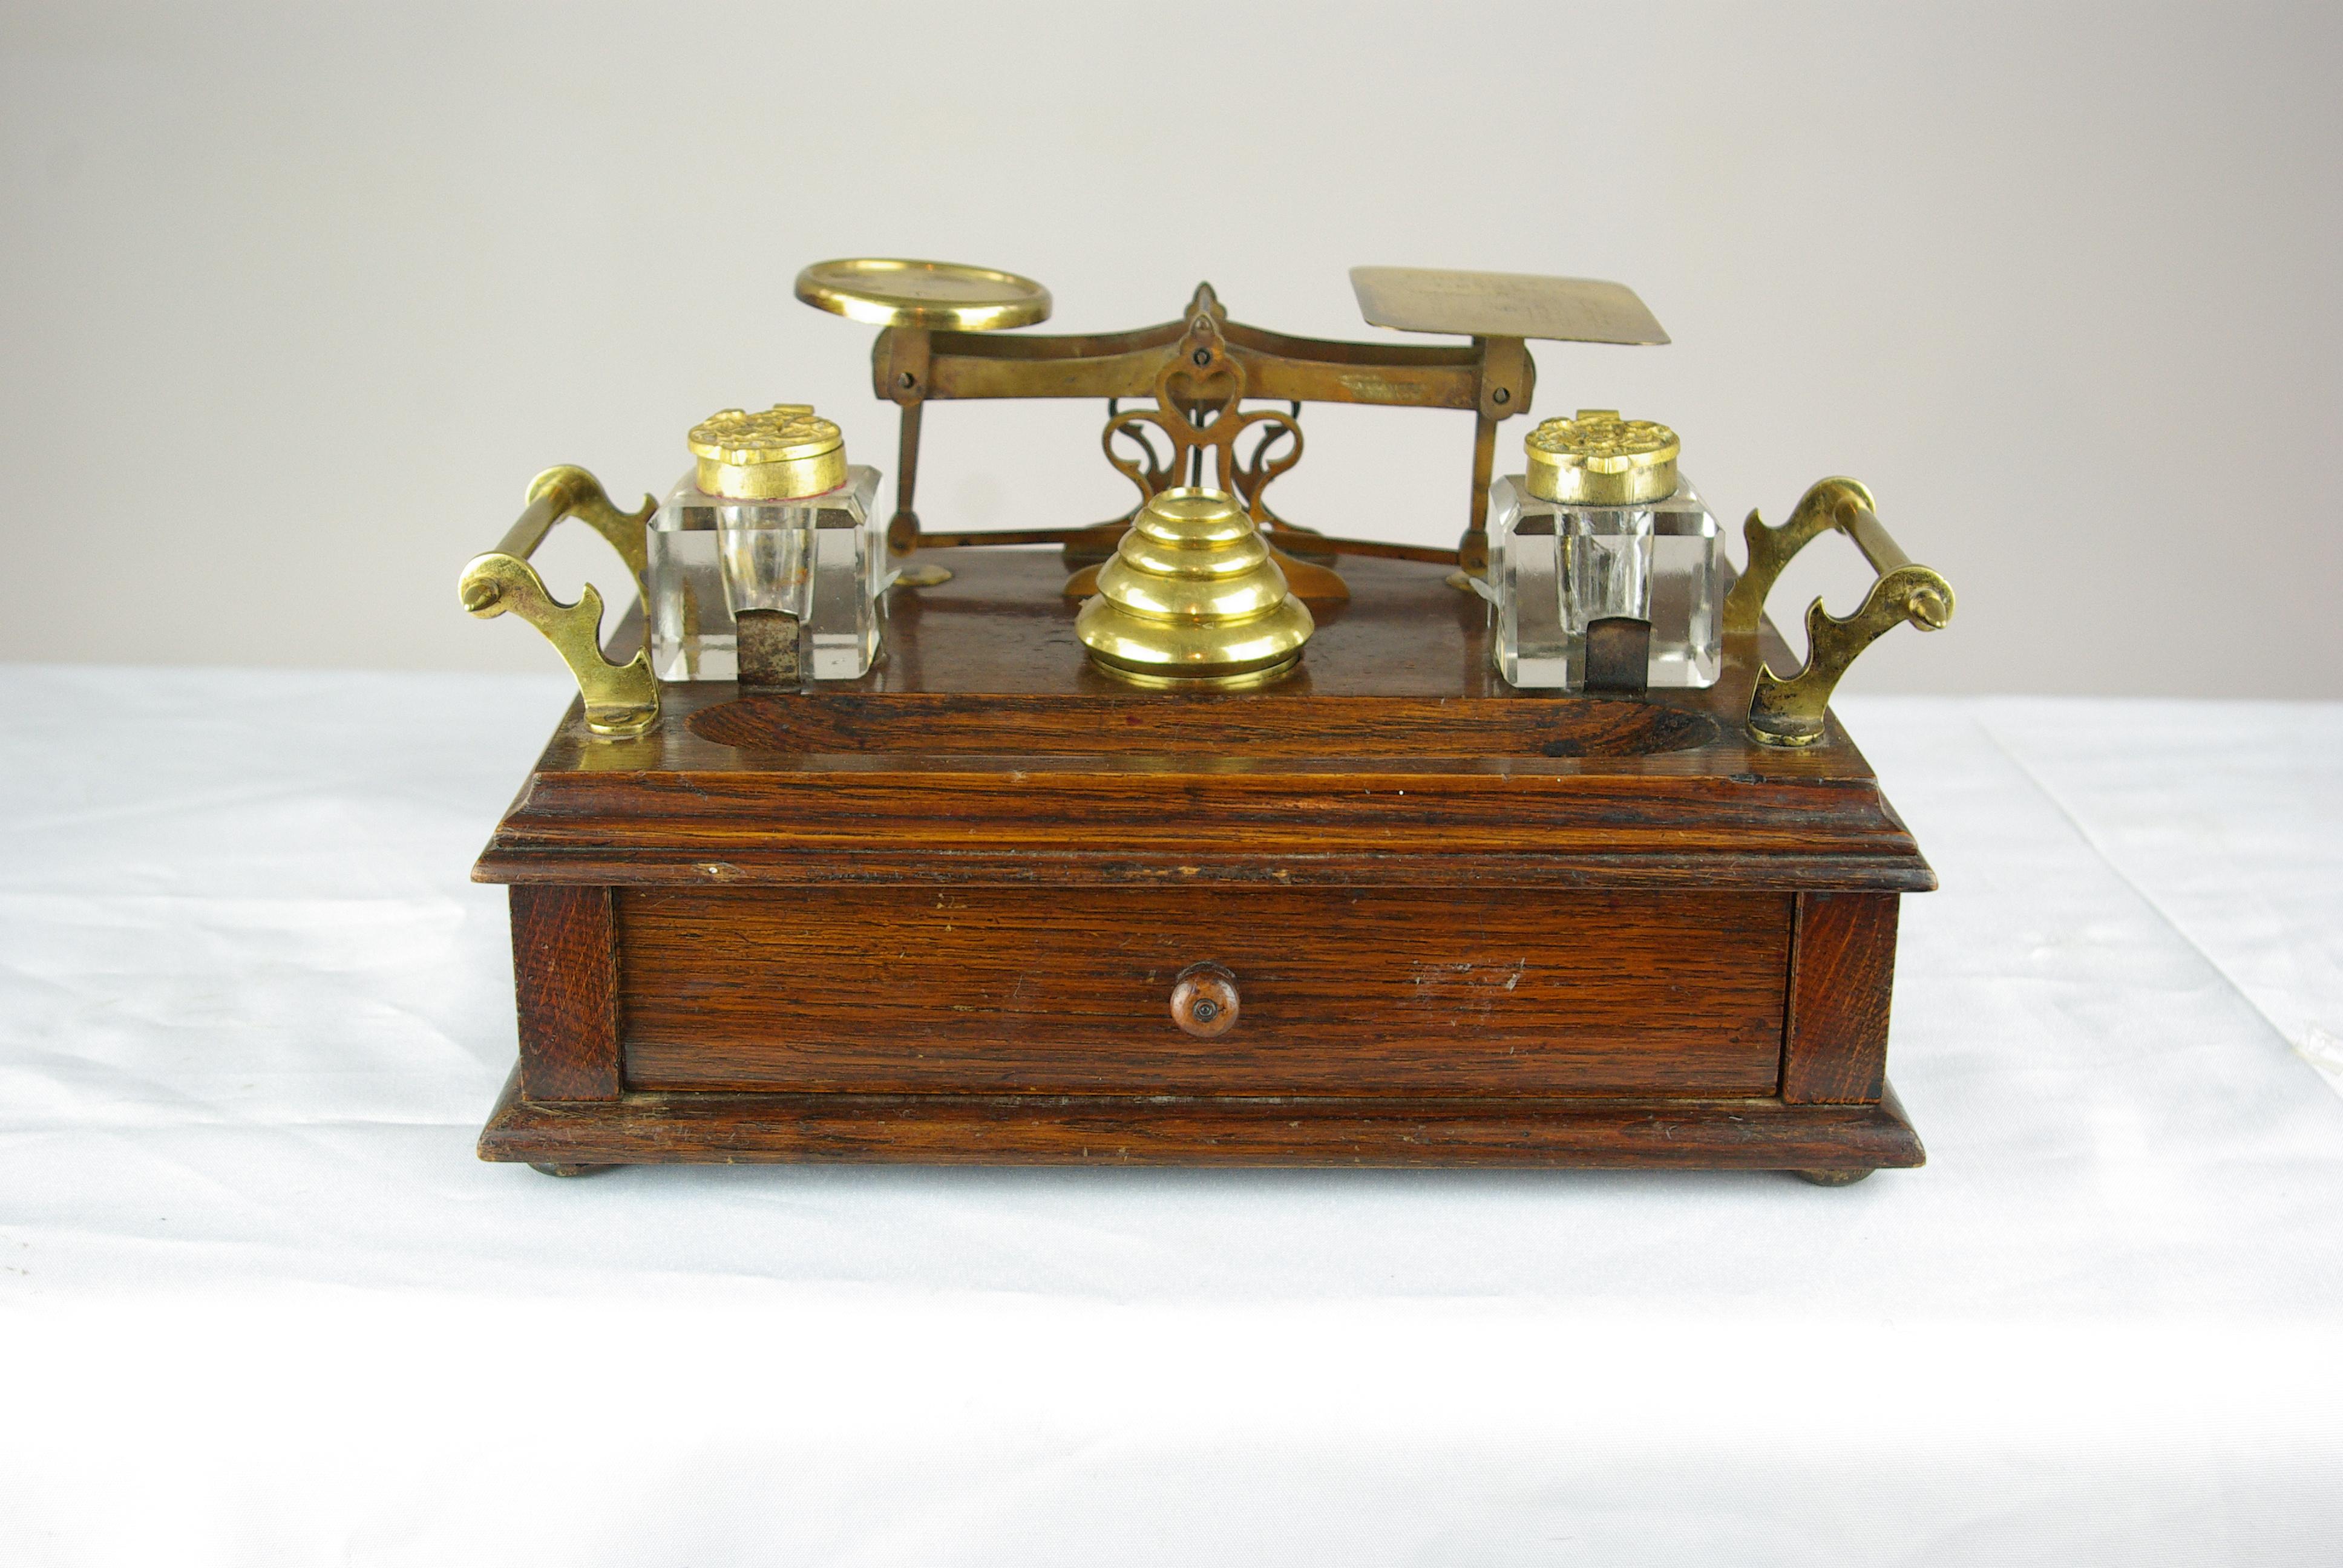 Antique desk set, Scottish Victorian inkstand, postal scale, and weights, very rare, B1430C

Scotland, 1870s
All original
Oak wooden stand with brass handles to lock side
Brass scales at the back with wonderful engraving on the